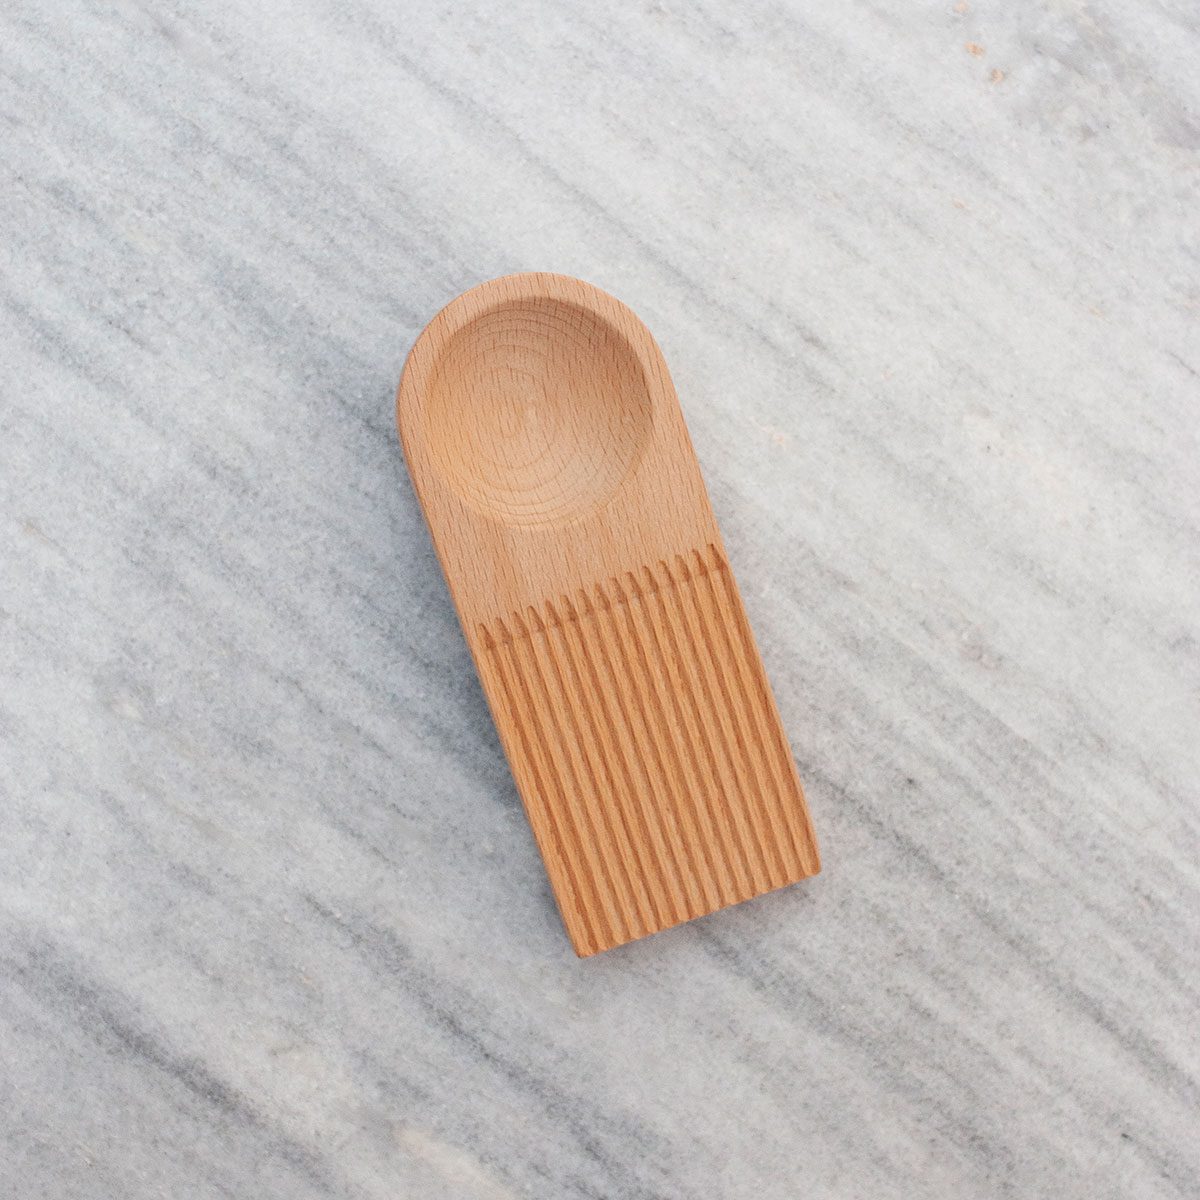 Noodles Wooden Butter Table And Popsicles Easily Make Authentic Homemade  Pasta Mold Non-stick Butter Board Roller Kitchen Tool